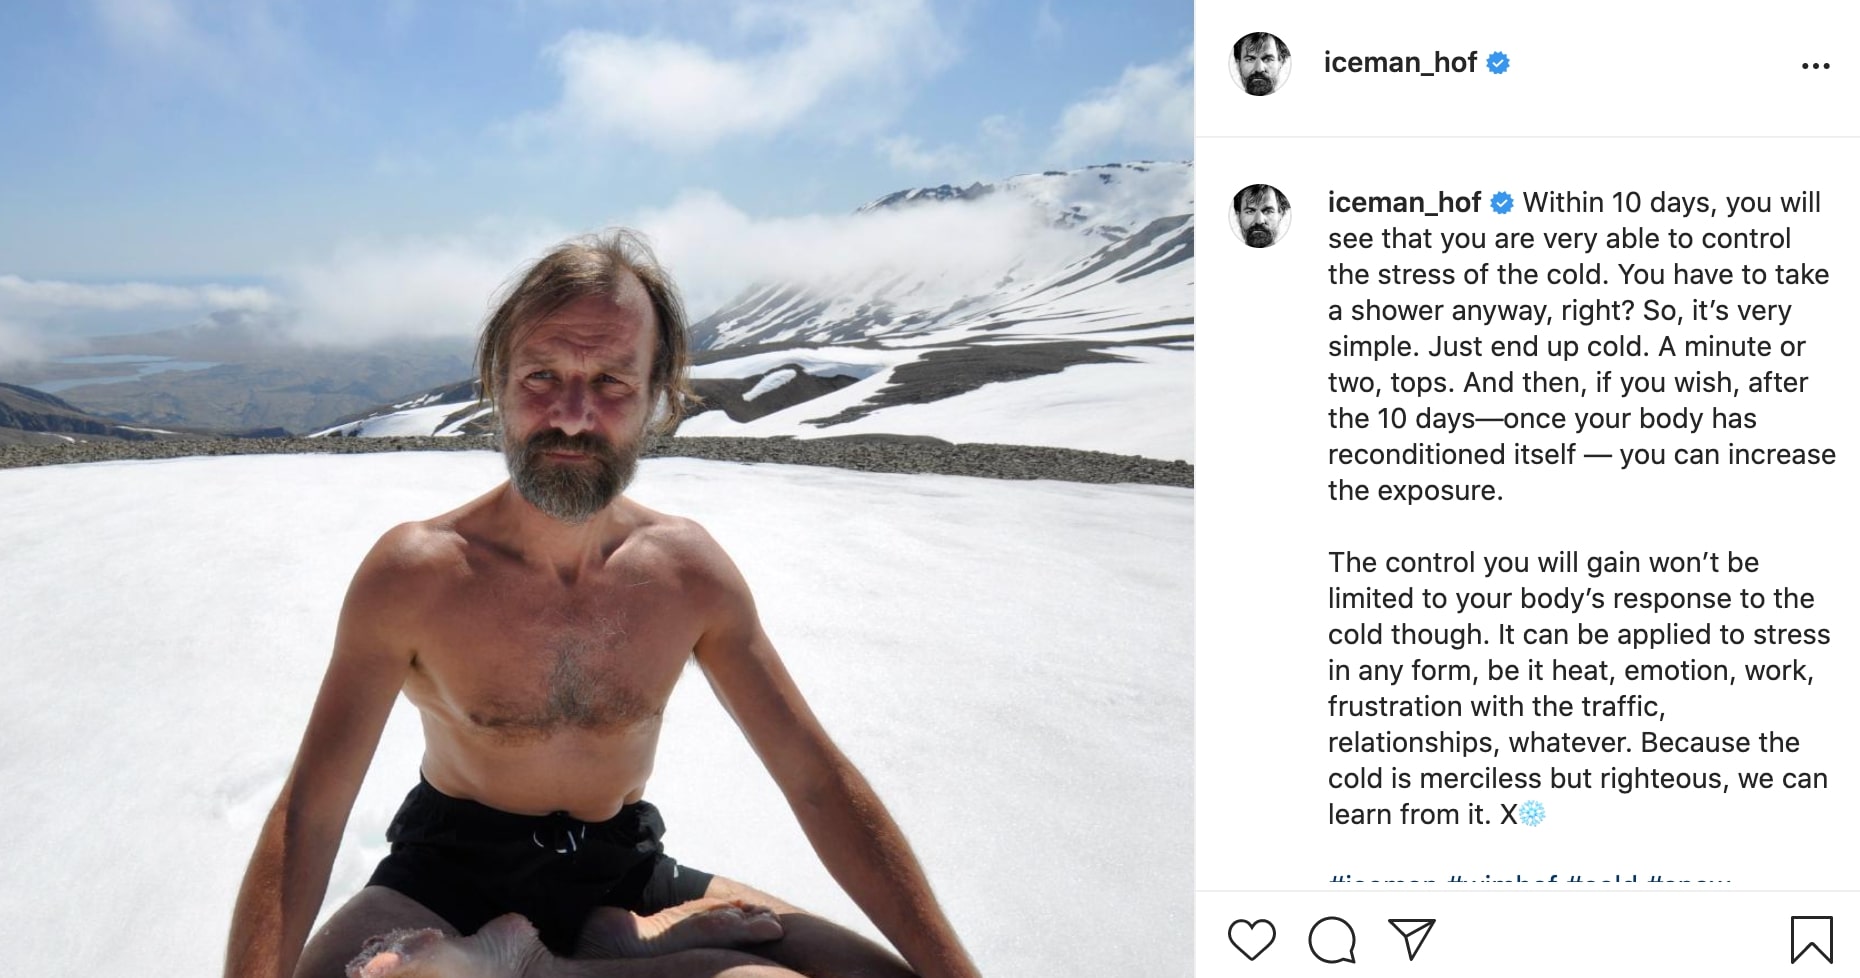 The Wim Hof Method - What Is It And Does It Really Work? - DOSE